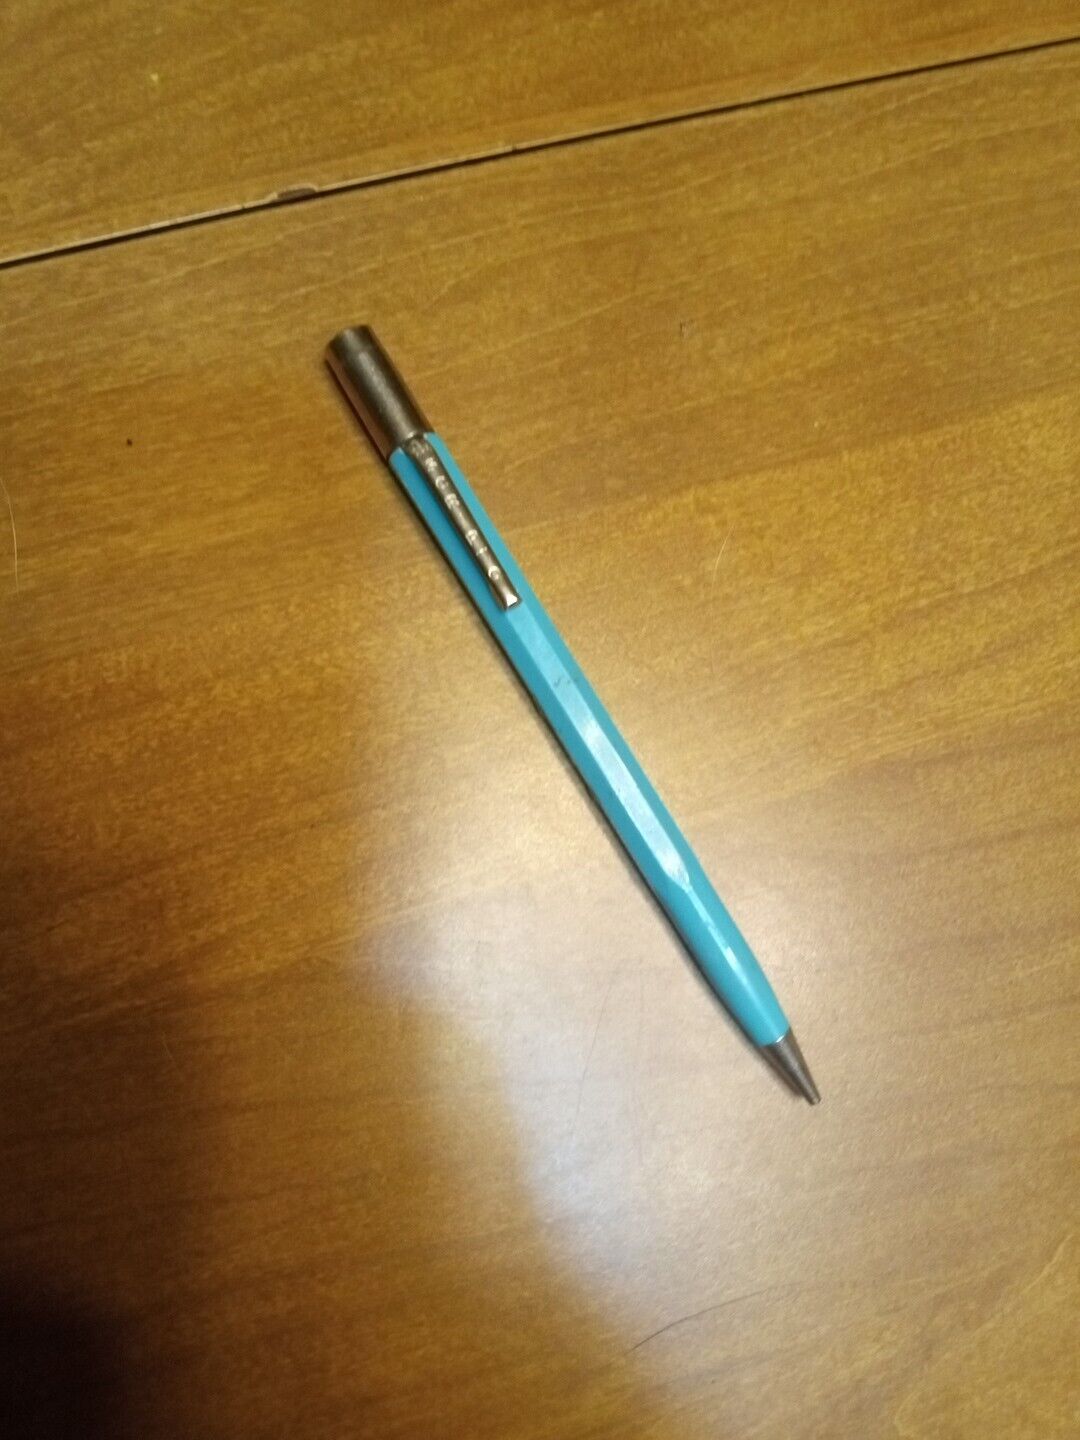 Vintage USA Made Scripto Mechanical Pencil Teal Color Works Great Very Decent